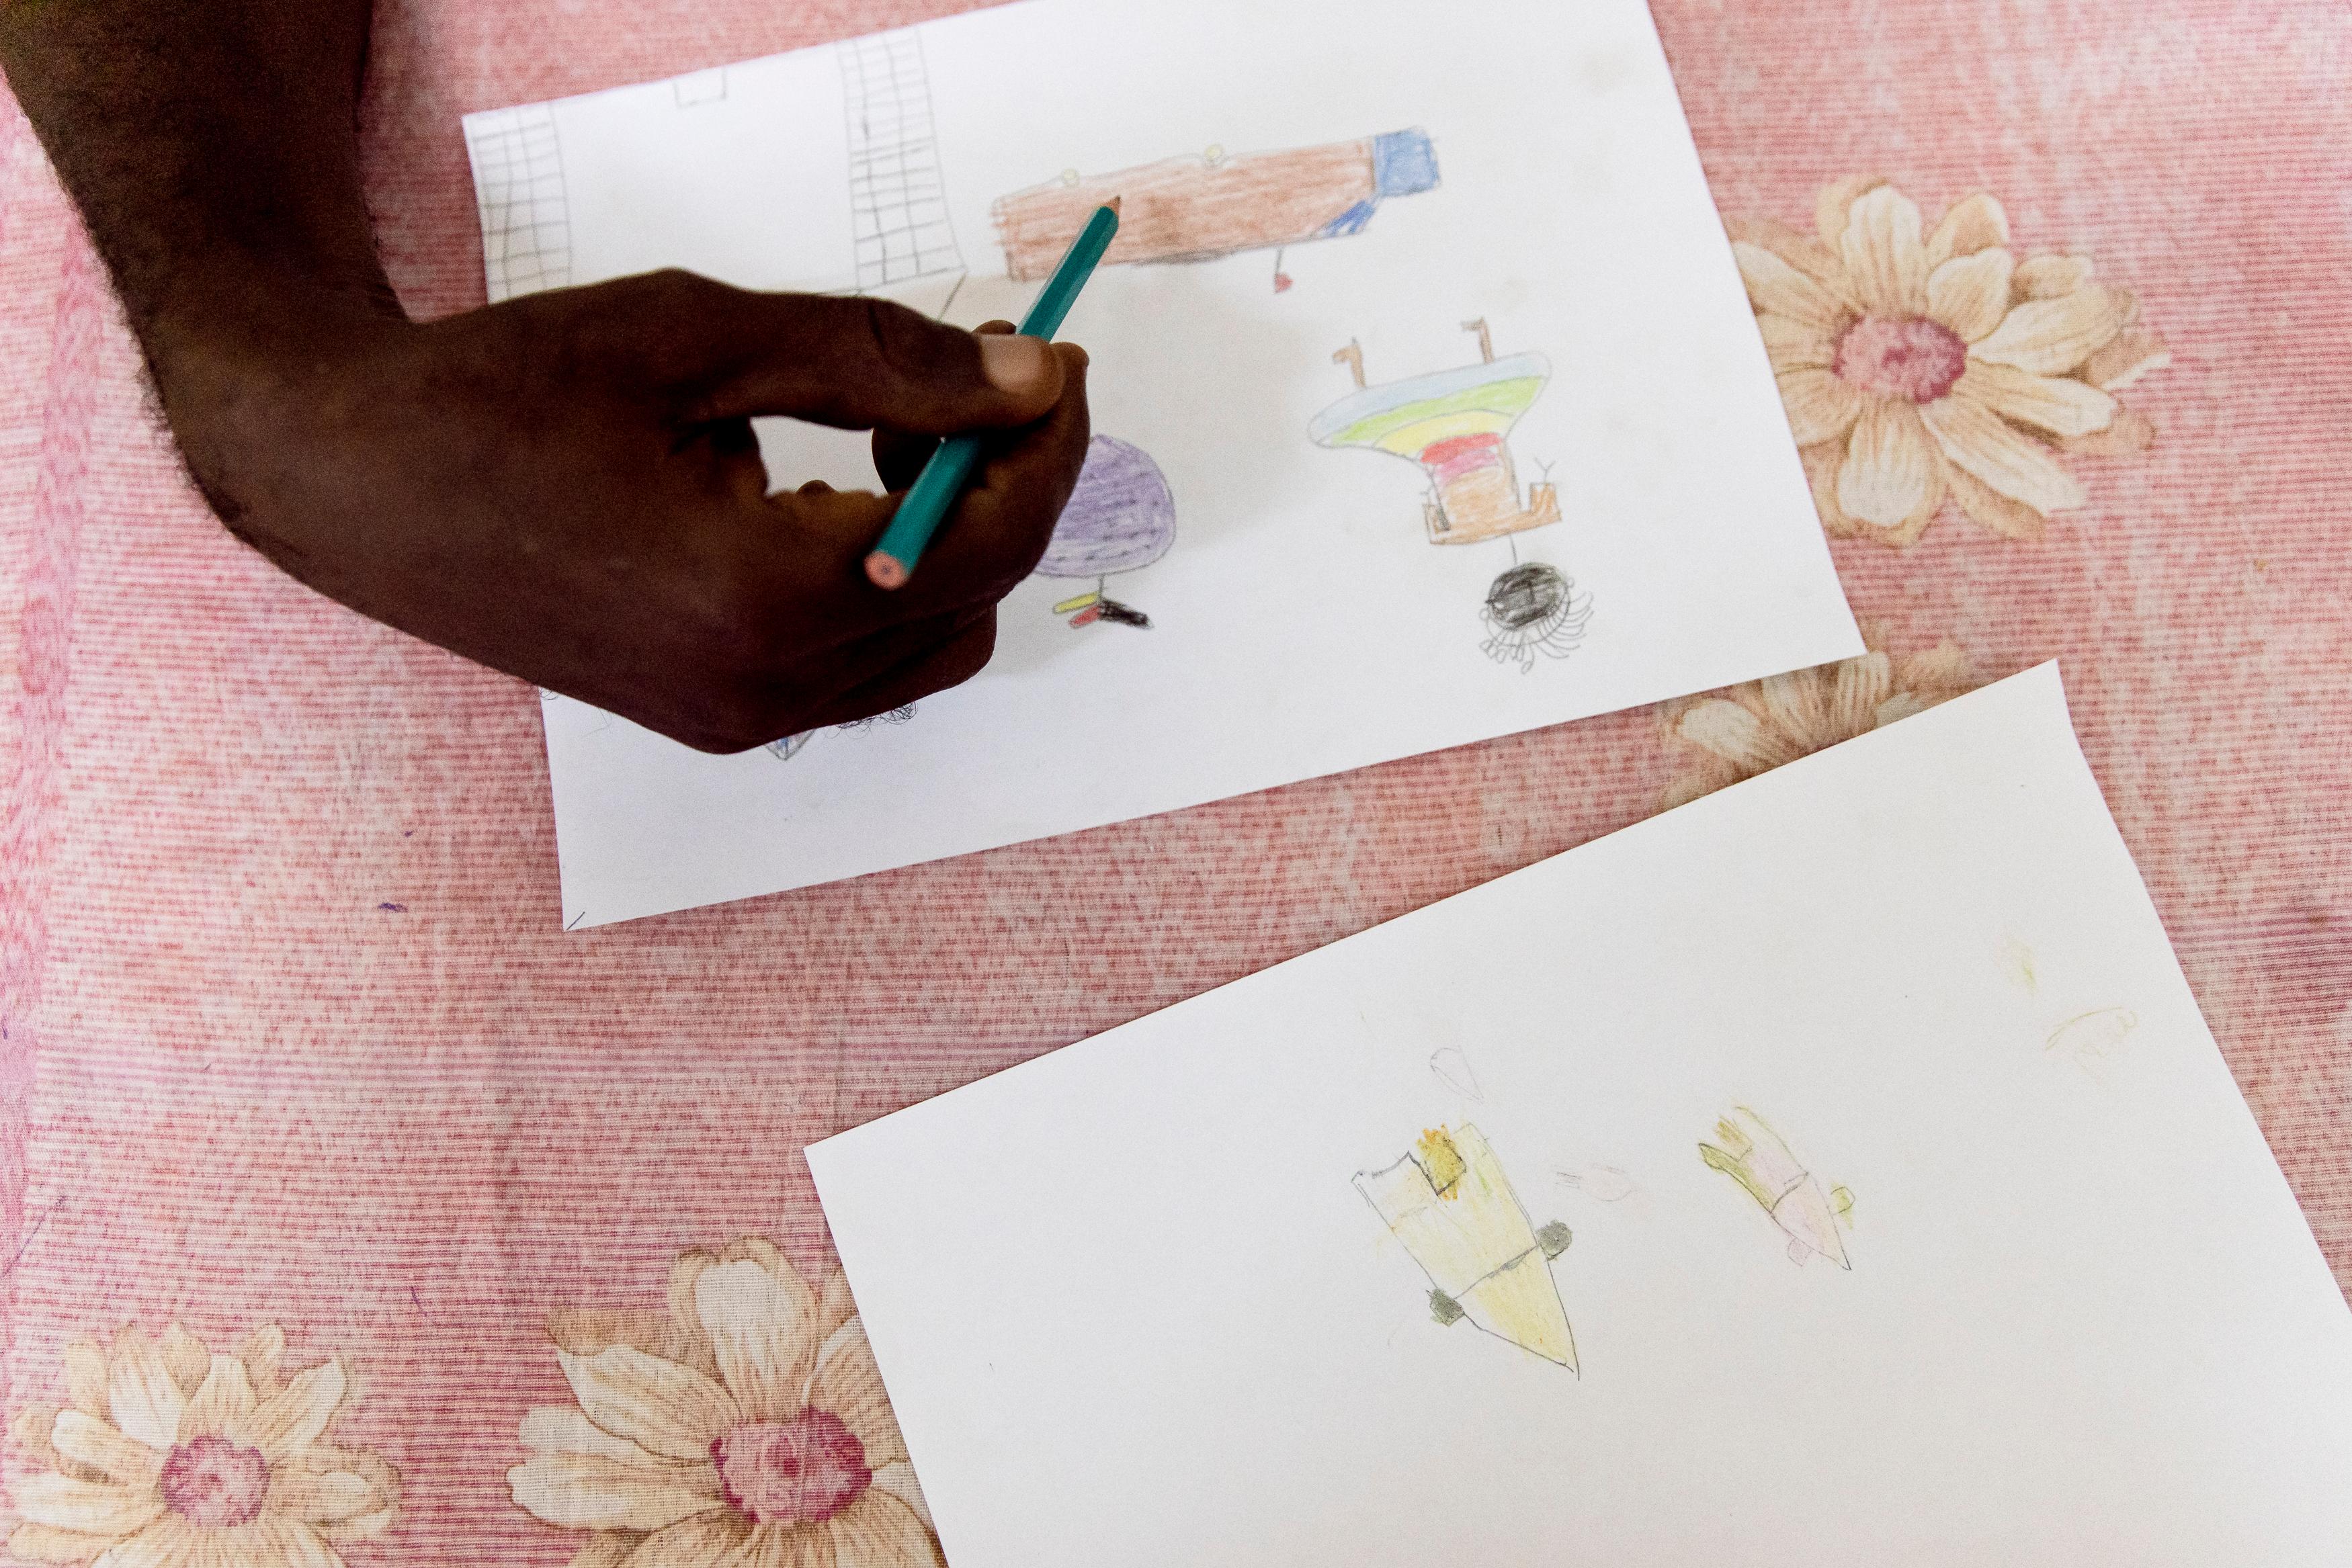 imé Césaire Likosso, mental health advisor with the MSF Tongolo project in Bangui, CAR, points out details in drawings made by child sexual assault survivors. Tongolo. November 2020. 